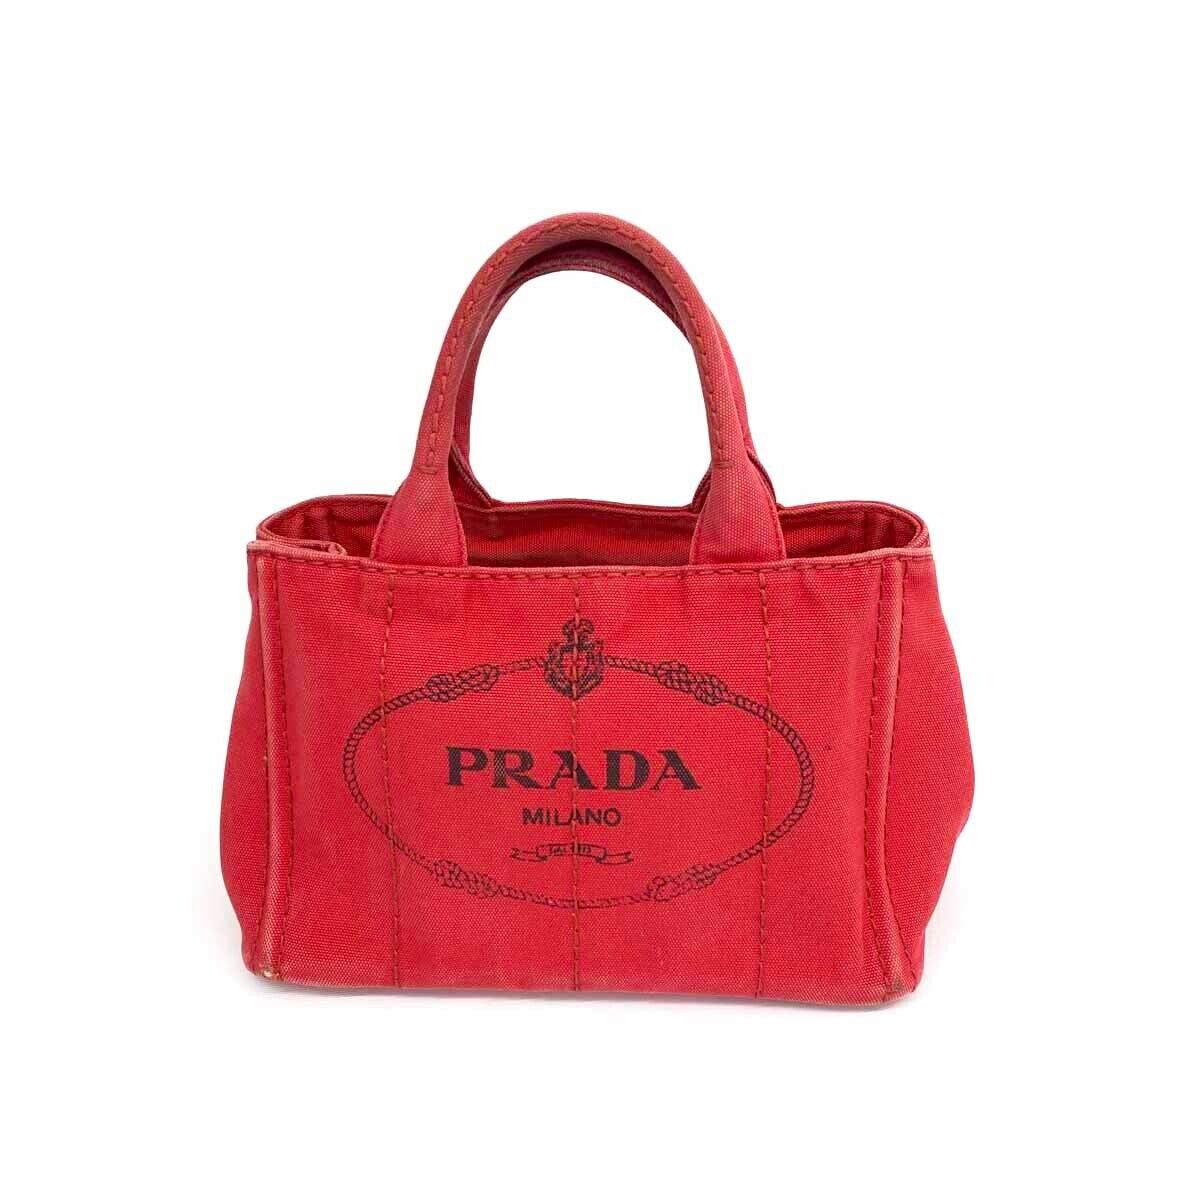 Authentic PRADA Canapa Canvas Tote Hand Bag S Pink Used VG